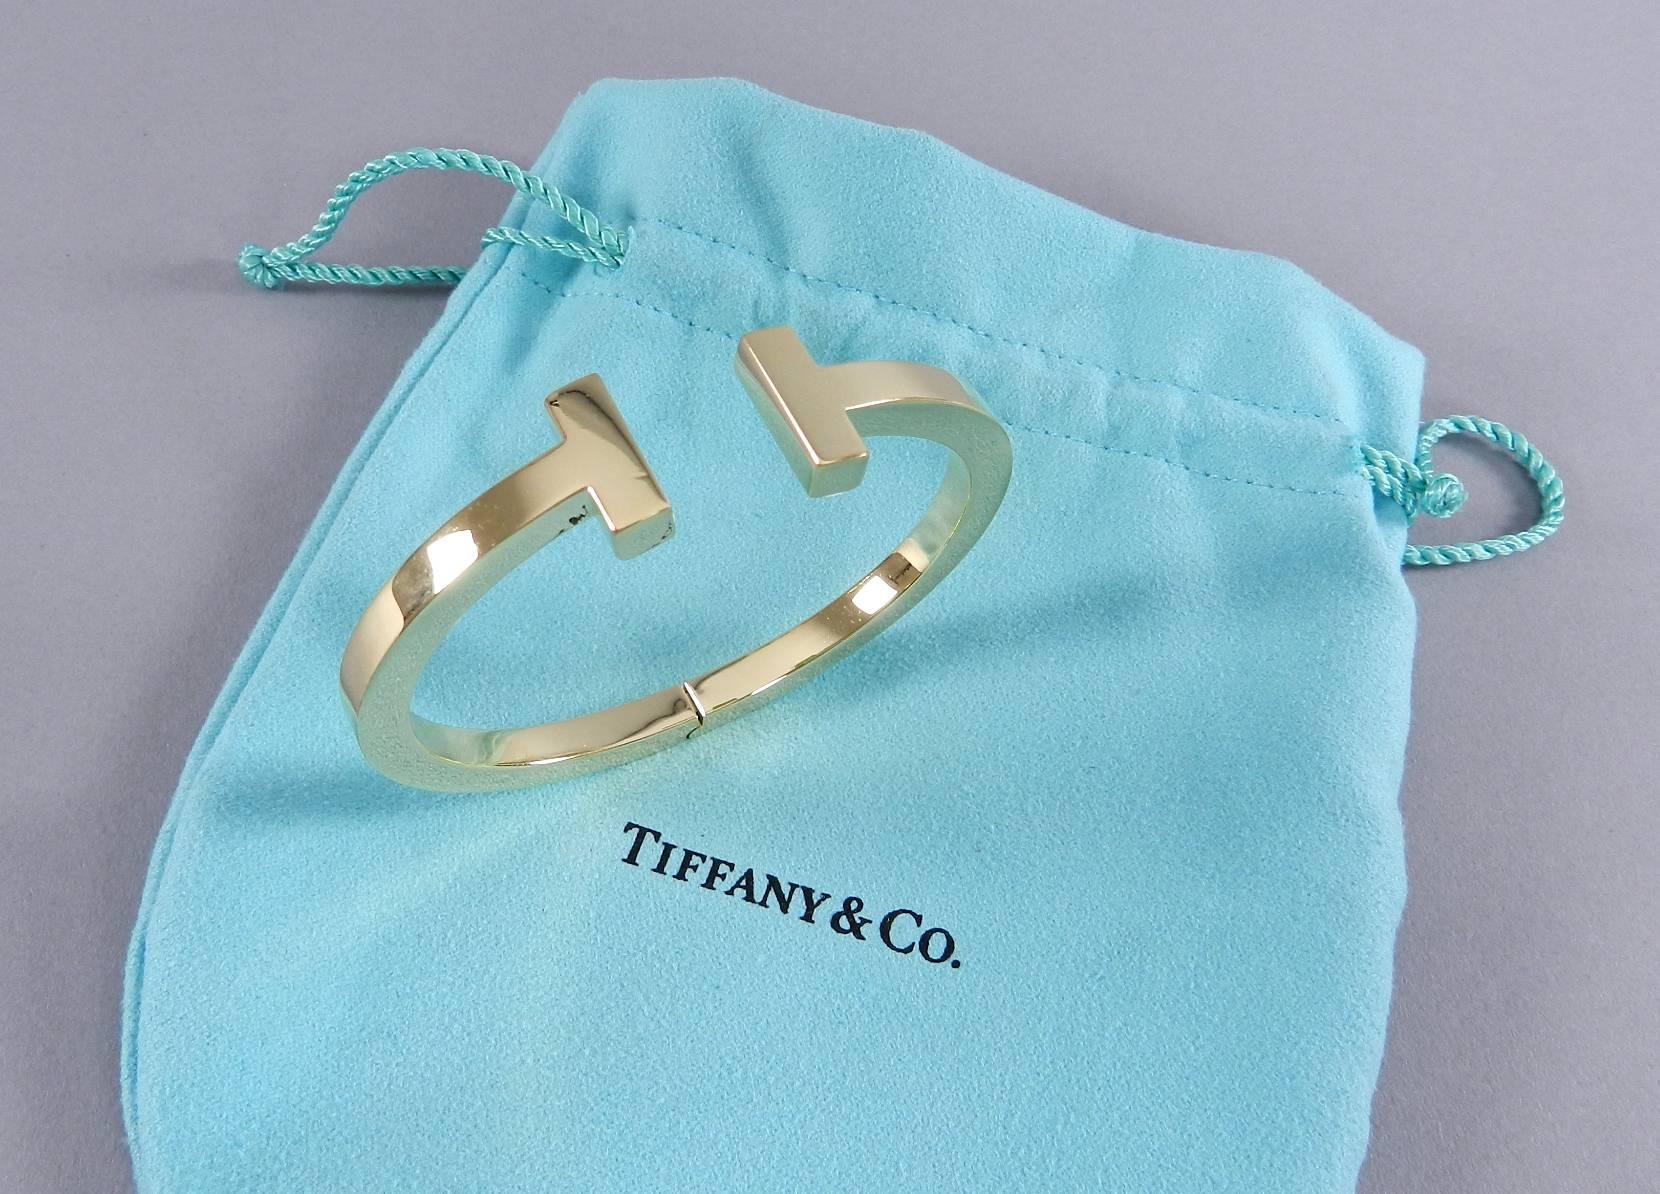 Tiffany and Co. medium T square 18k yellow gold hinged bracelet. Hallmarked (c) Tiffany and Co. AU 750 Italy. Measures 15 mm tall, 6.5